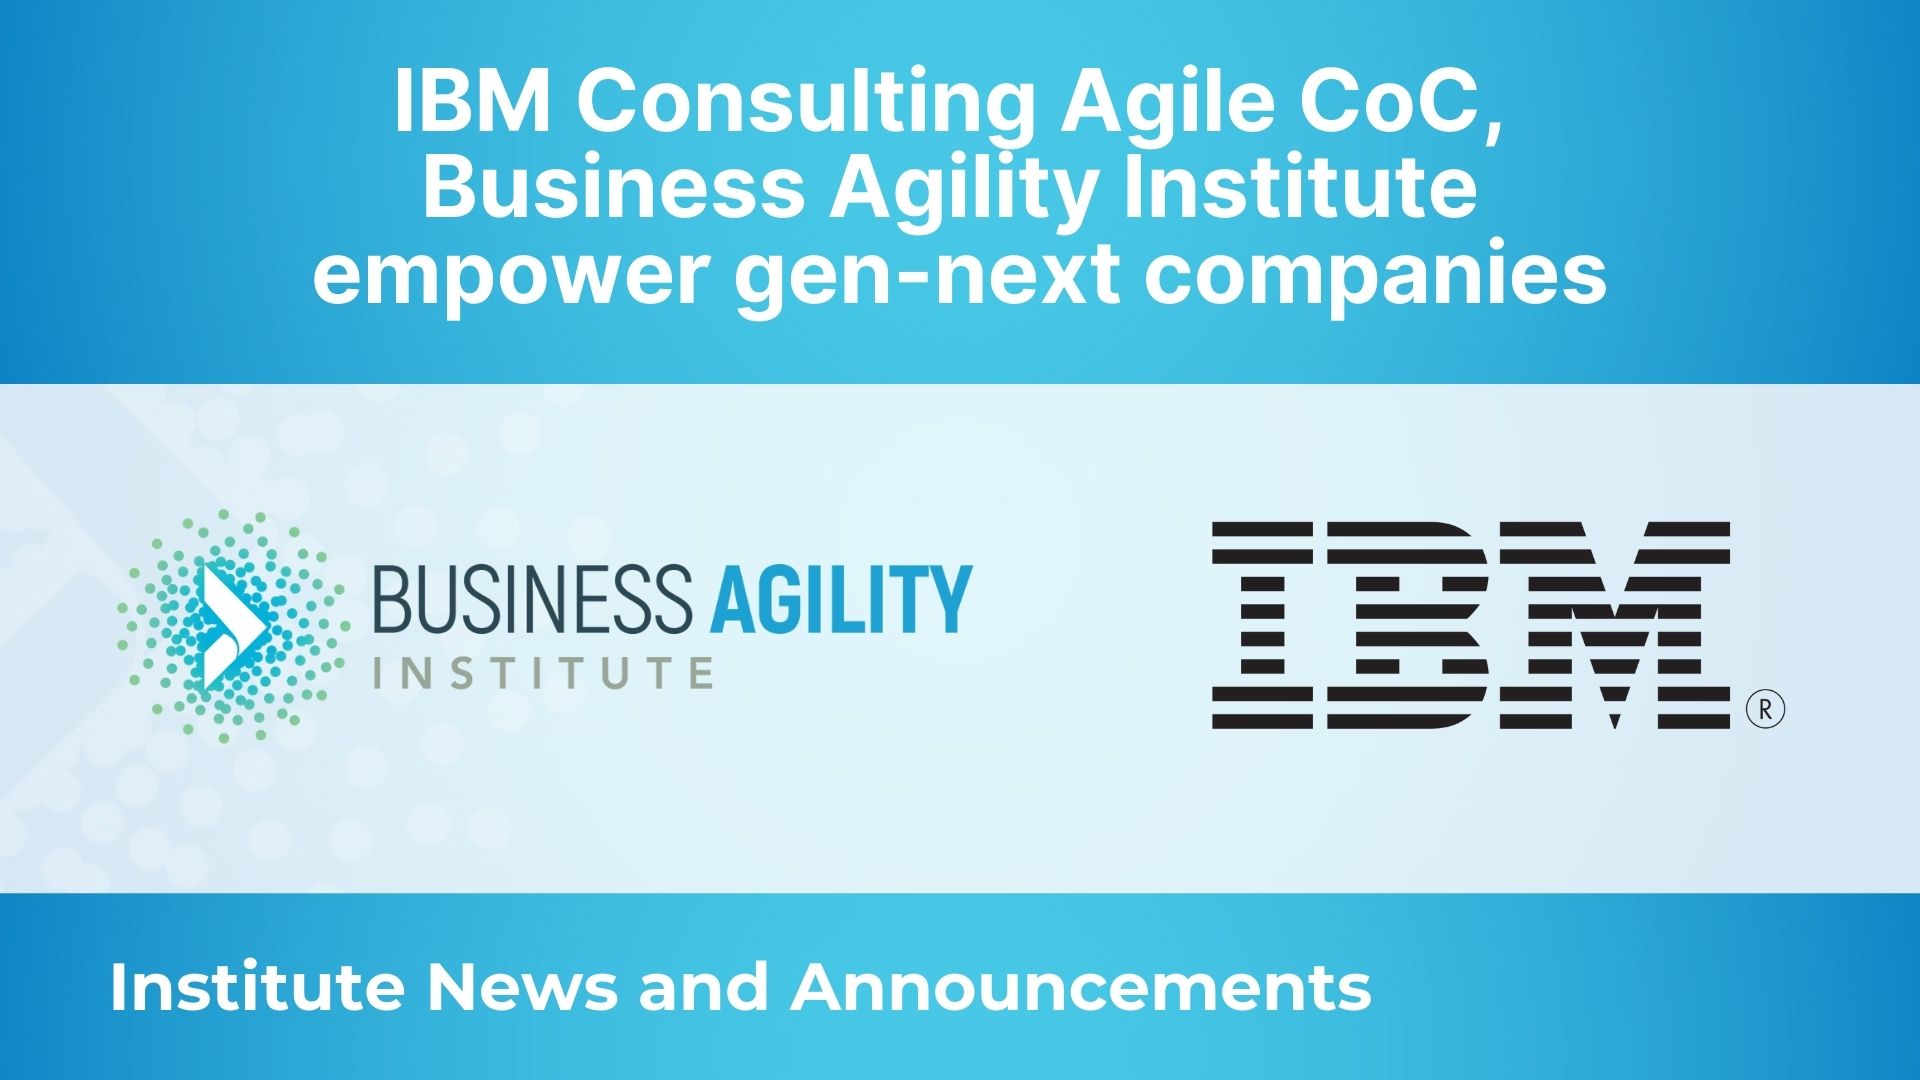 IBM Consulting Agile CoC, Business Agility Institute empower gen-next companies